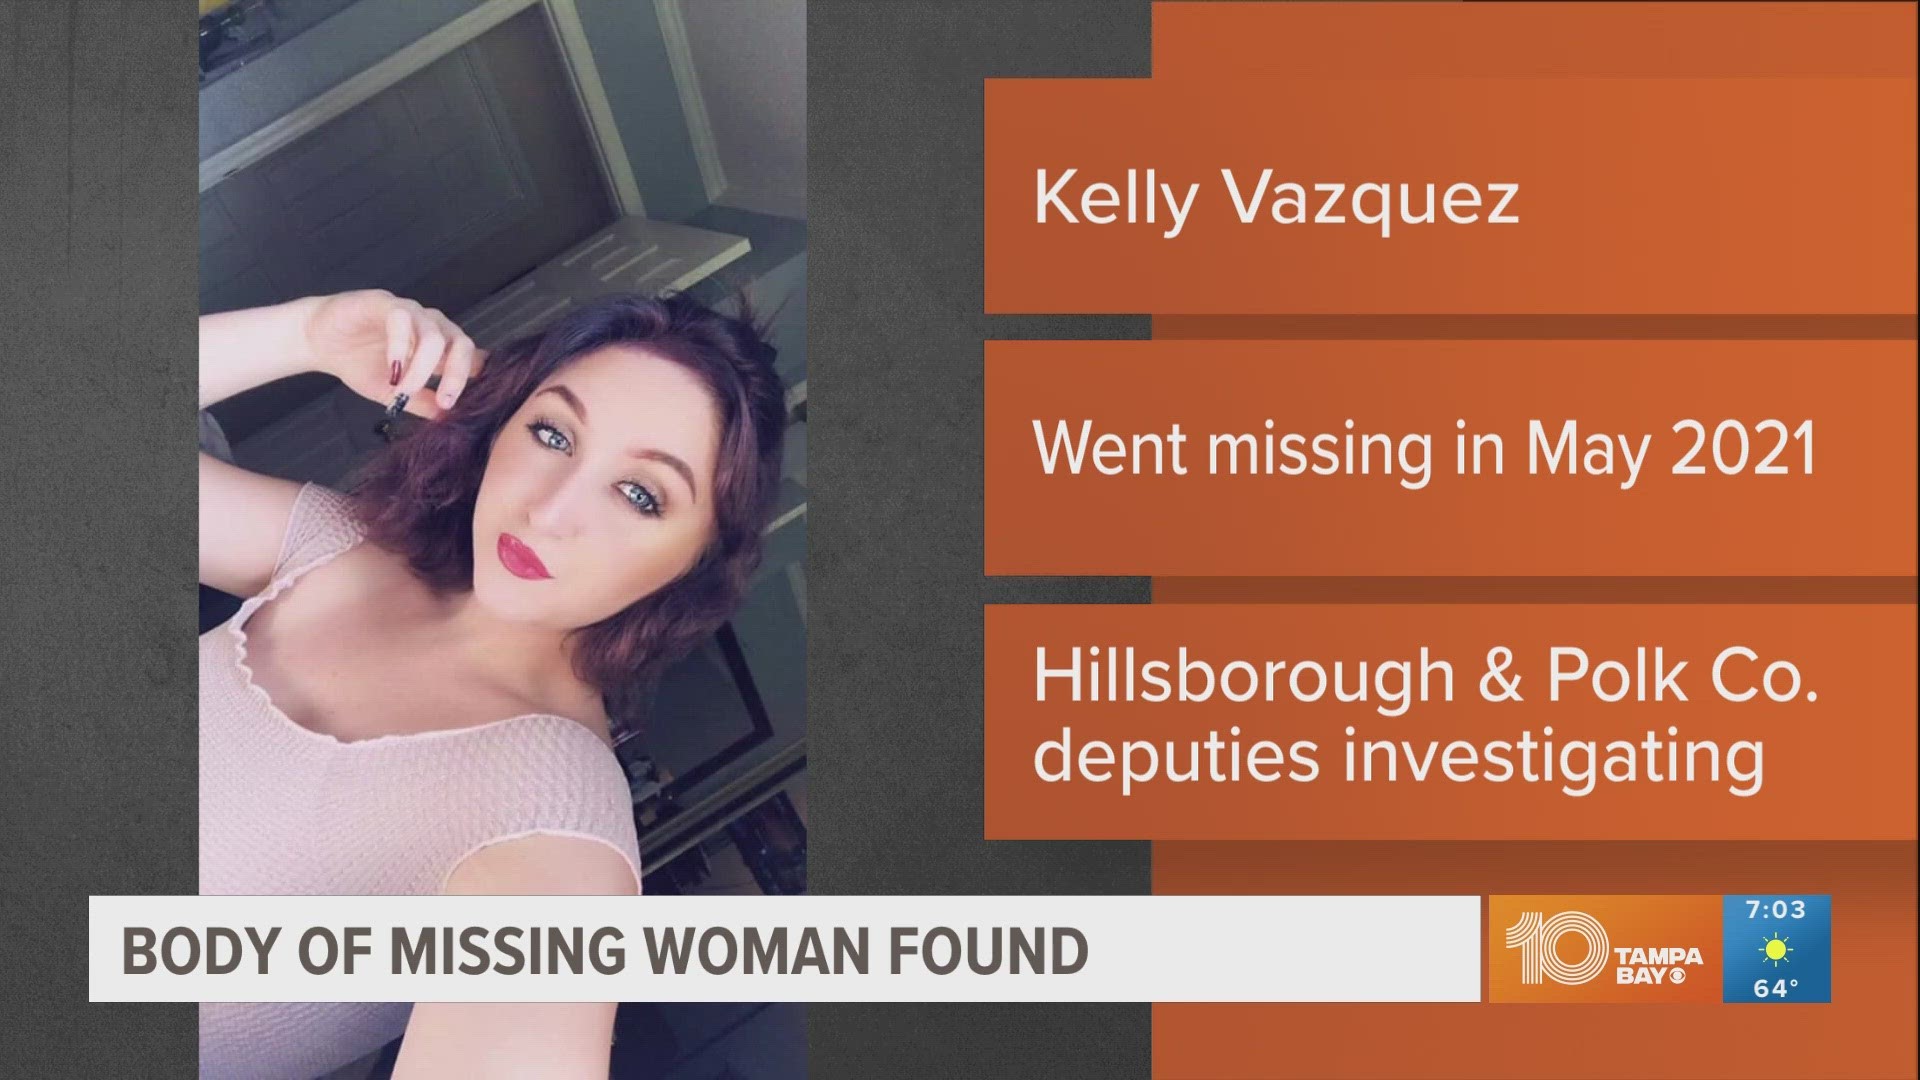 The Polk and Hillsborough County Sheriff's Offices confirmed that remains found in September were Kelly Vazquez who went missing in May 2021.